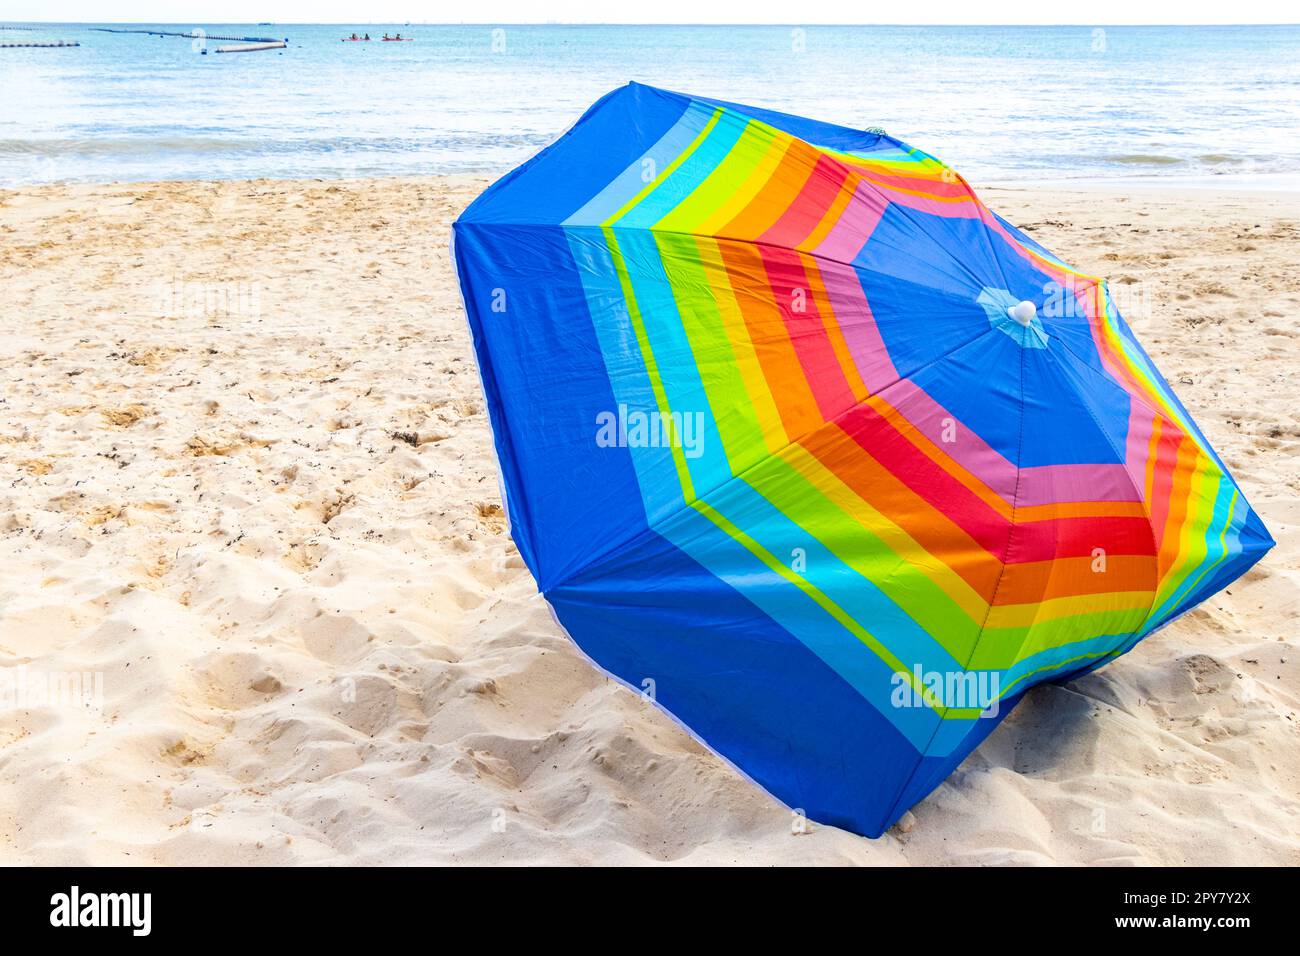 Colorful parasol with many colors on the beach in Mexico Stock Photo - Alamy